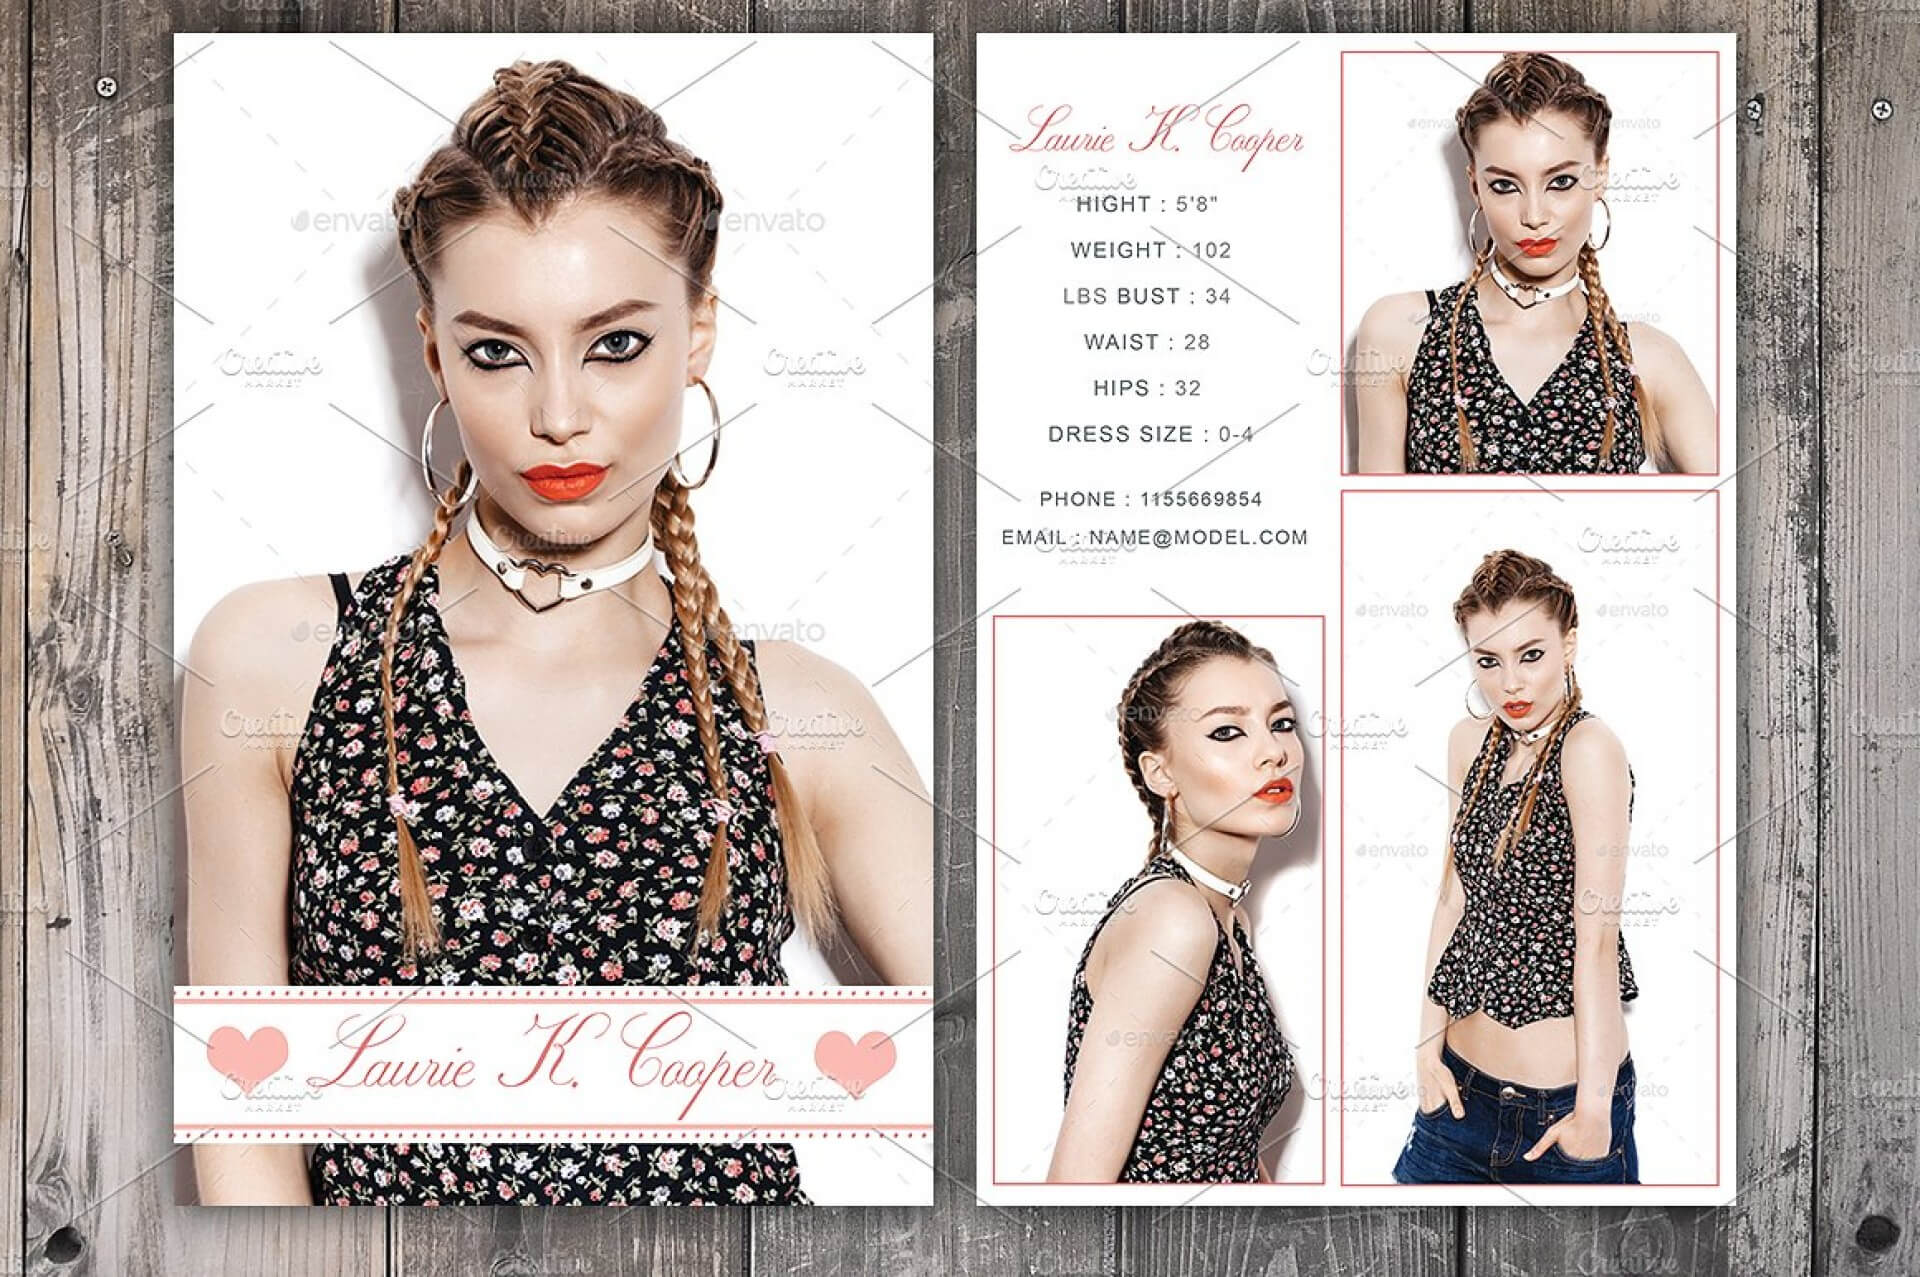 Free Comp Card Template Brochure Templates For Mac Photoshop Within Download Comp Card Template